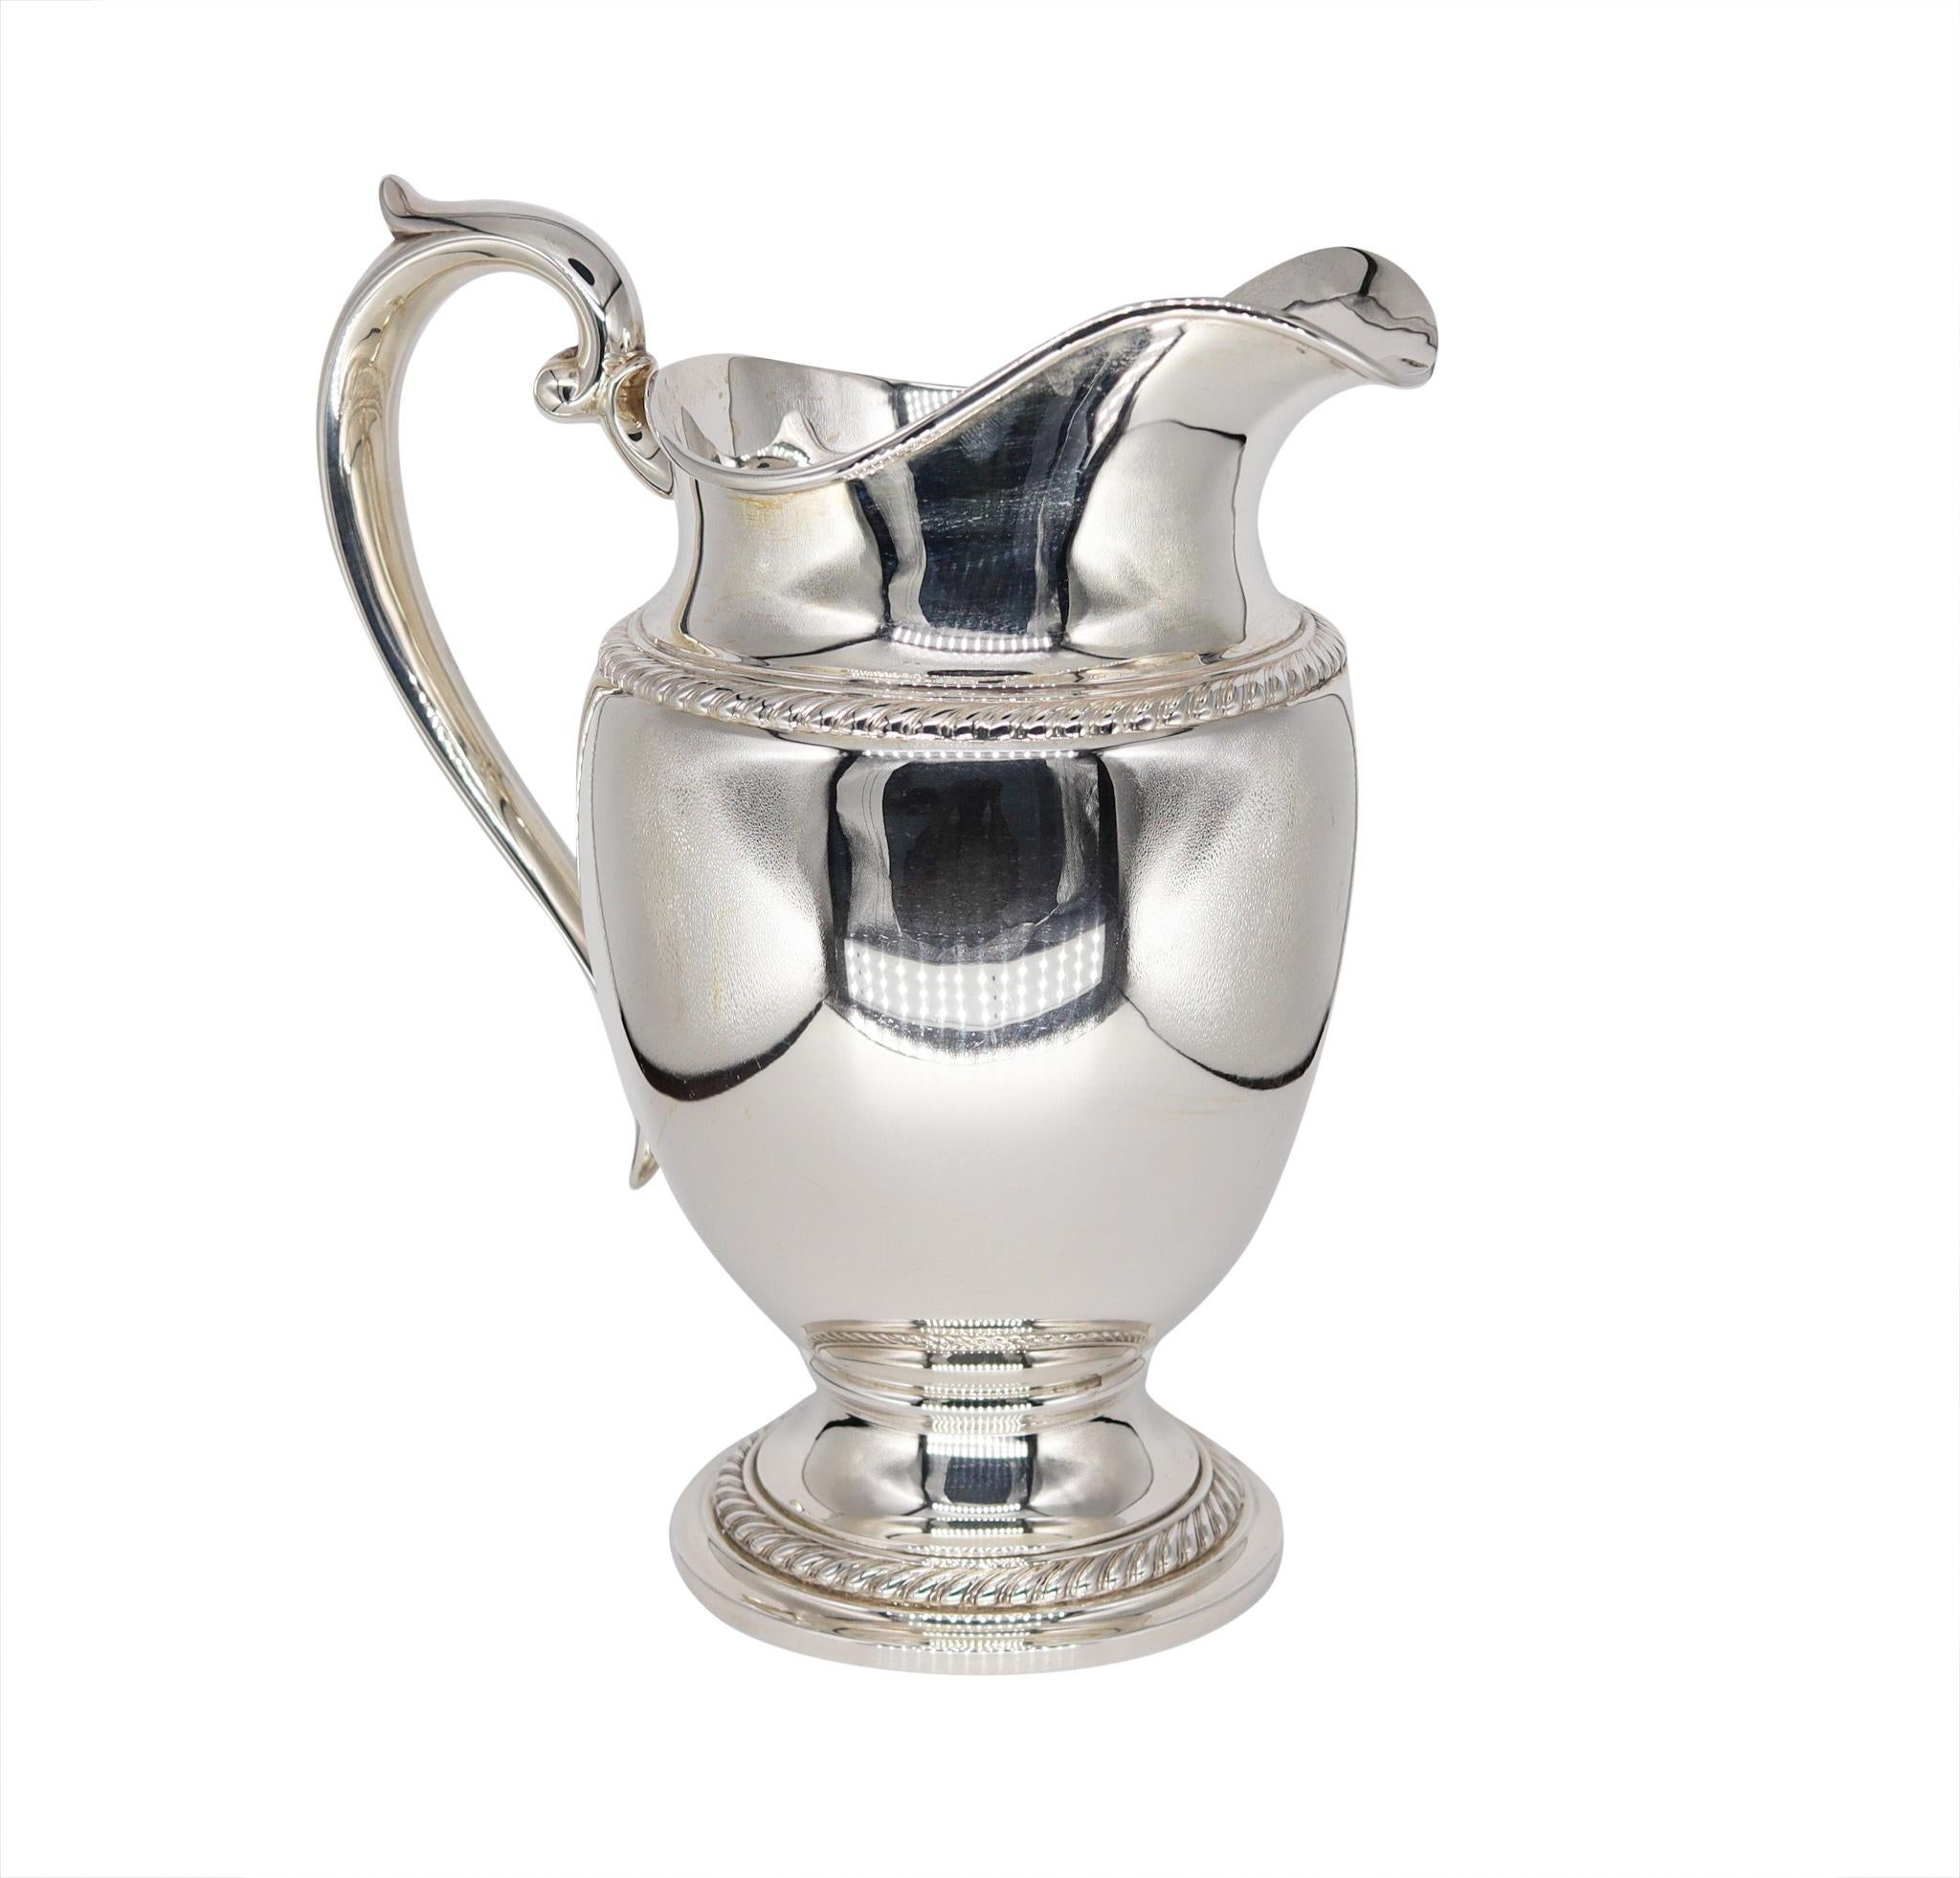 Classic water pitcher ewer designed by Gorham.

Beautiful vintage American piece from Gorham. A large water pitcher crafted in solid .925/.999 sterling silver, back in the 1948. Designed with a full bulbous shaped body and a scroll handle, on a